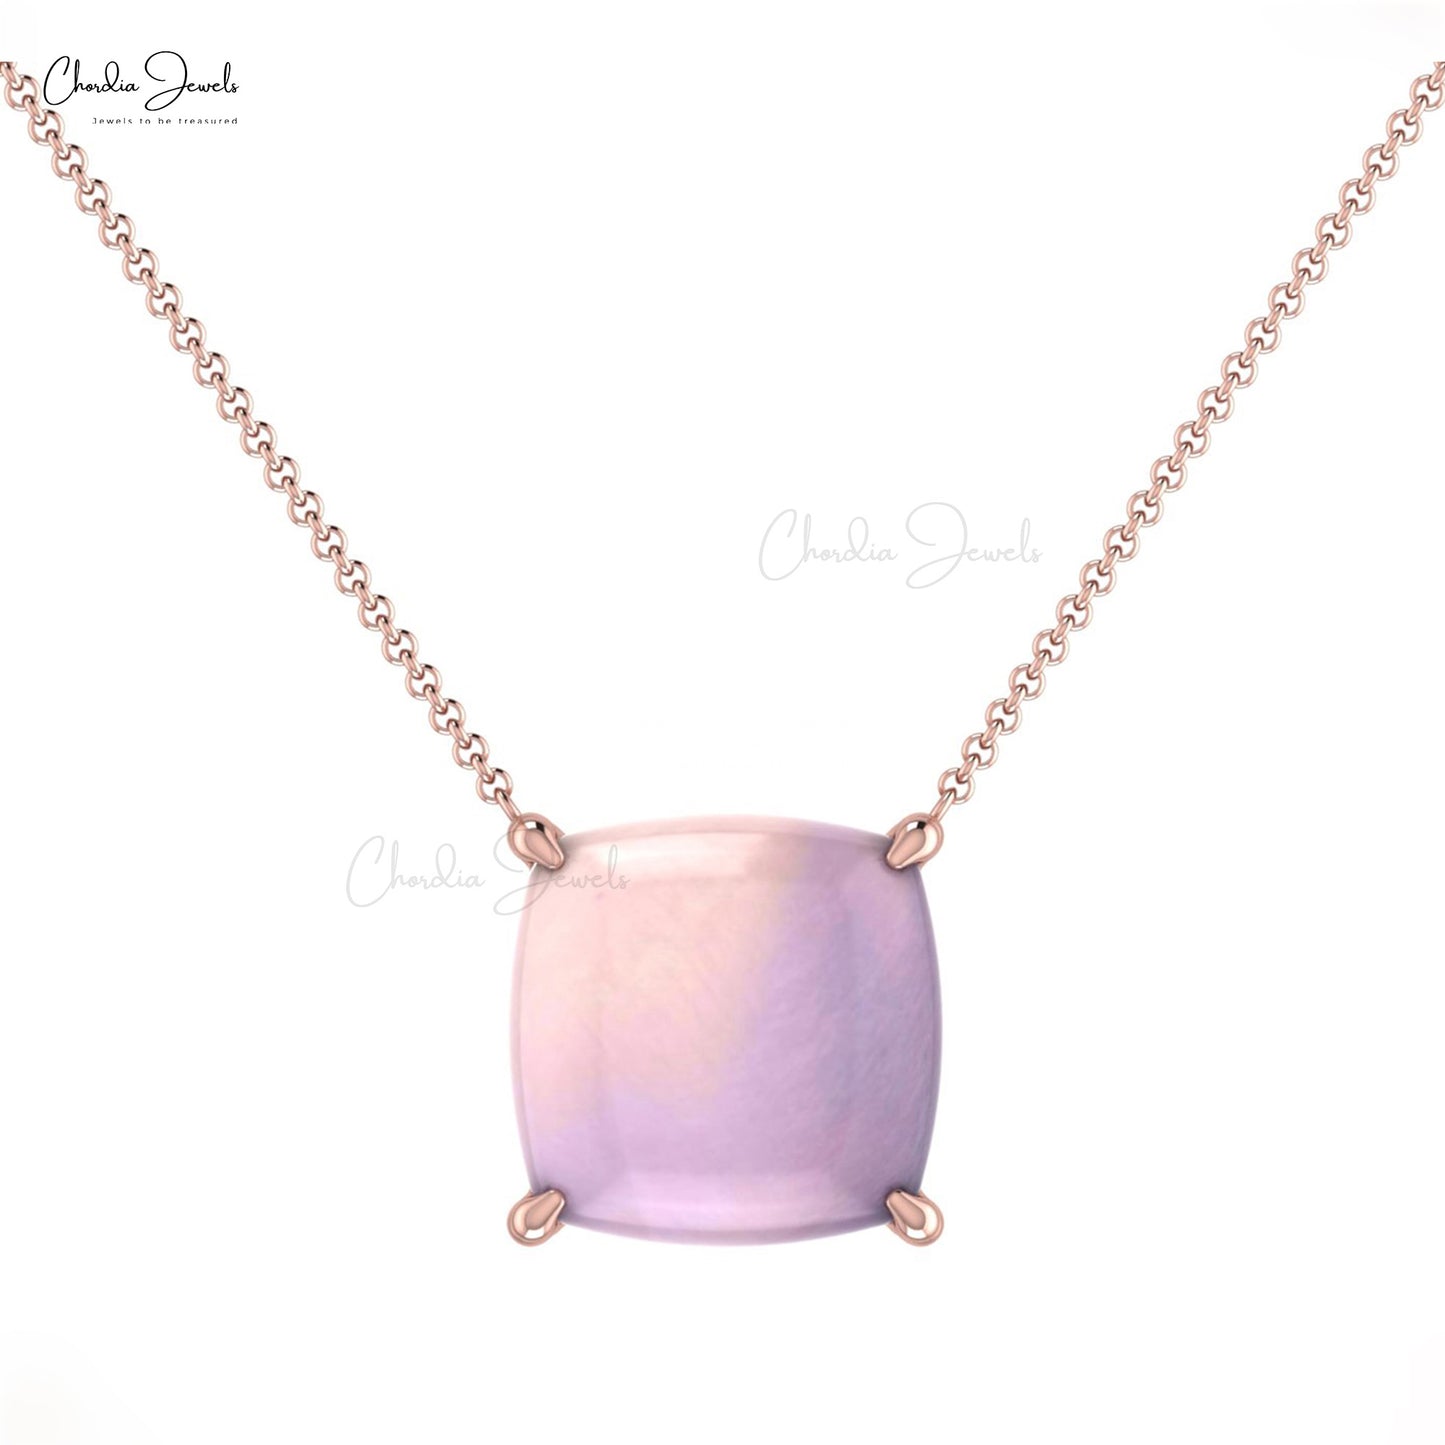 Vintage Antique Natural Rose Quartz Necklace Pendant For Women 8mm Cushion Shape Gemstone Necklace in Pure 14k Gold Gift For Girlfriend